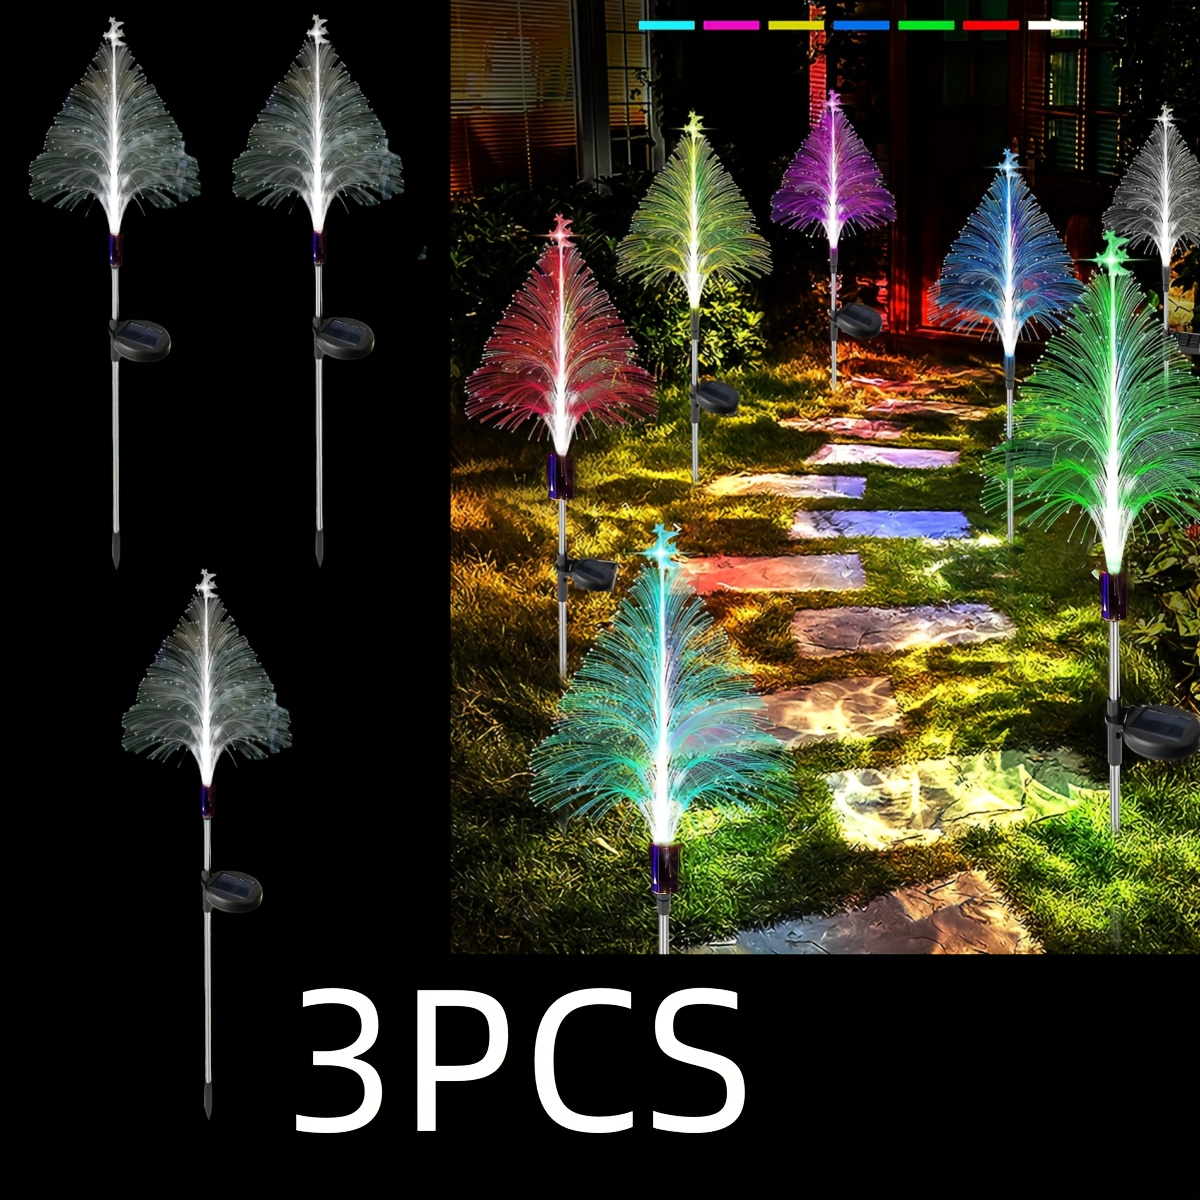 Solar Christmas Lights: Are They Worth It?